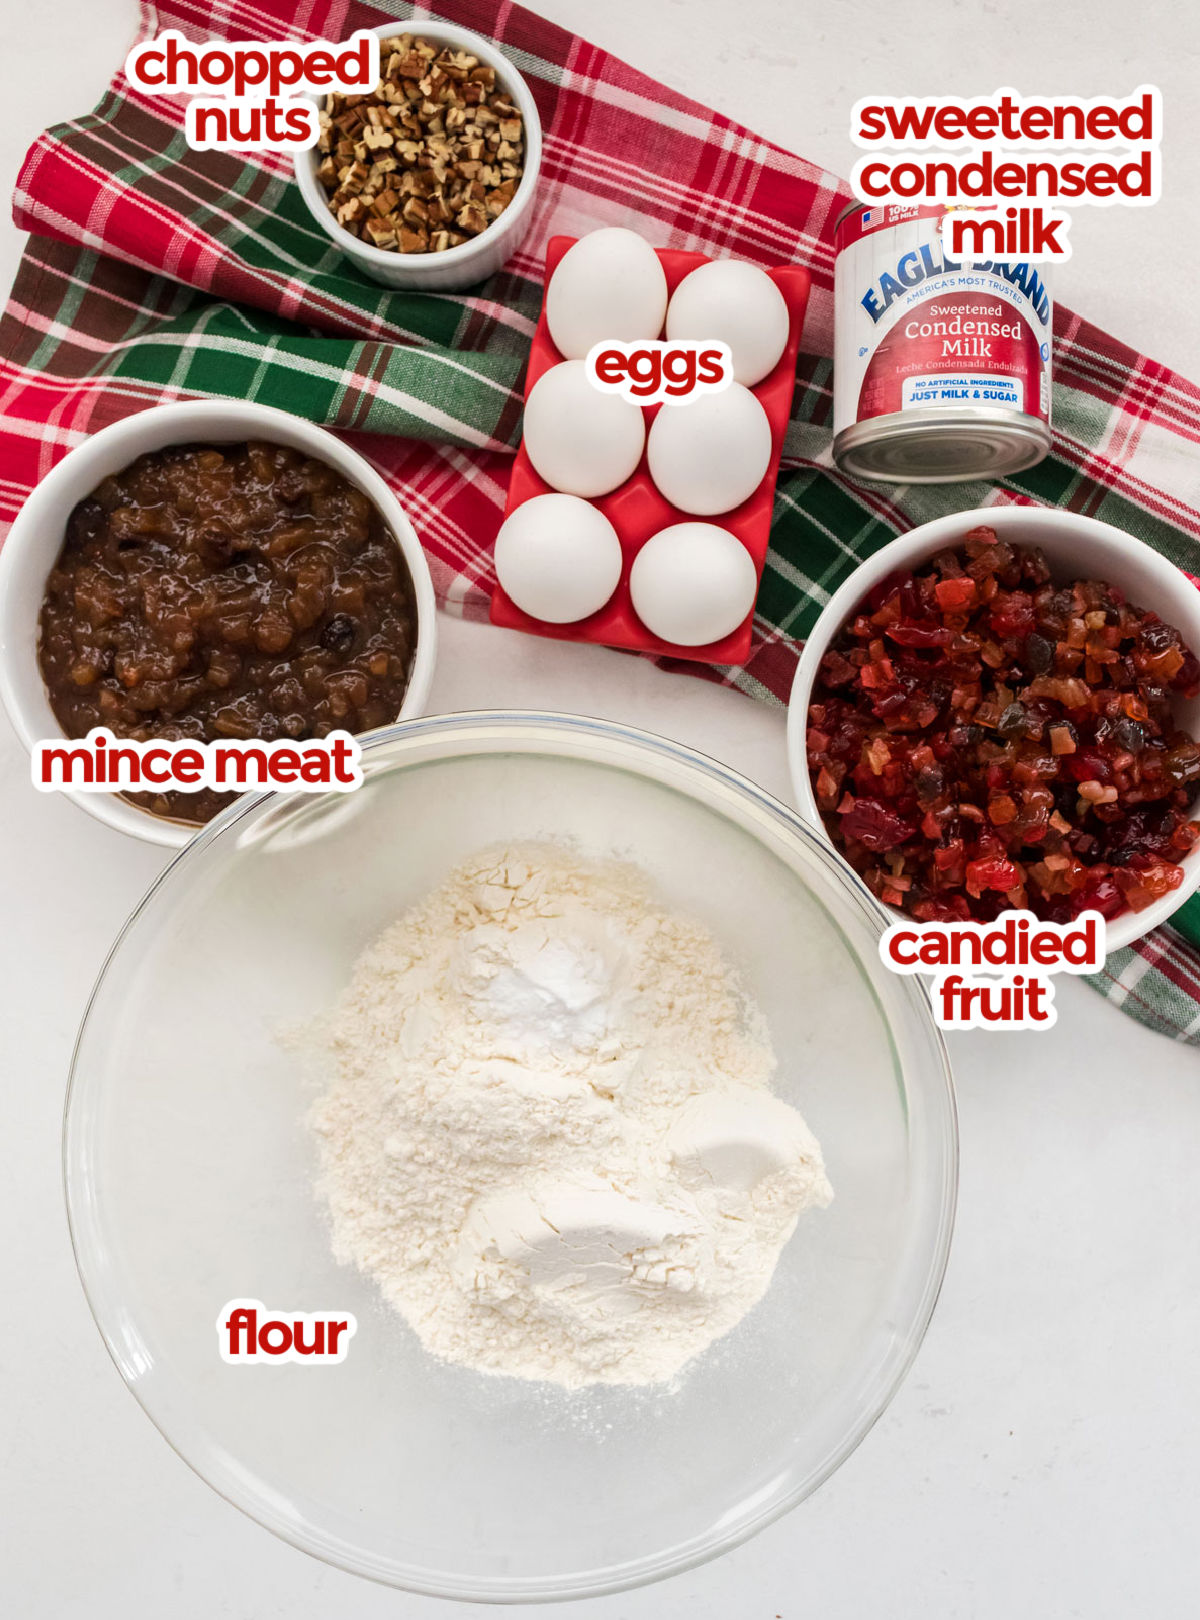 All the ingredients you will need to make The Best Fruit Cake Recipe including chopped nuts, Sweetened Condensed Milk, Eggs, Mincemeat, Candied Fruit and Flour.